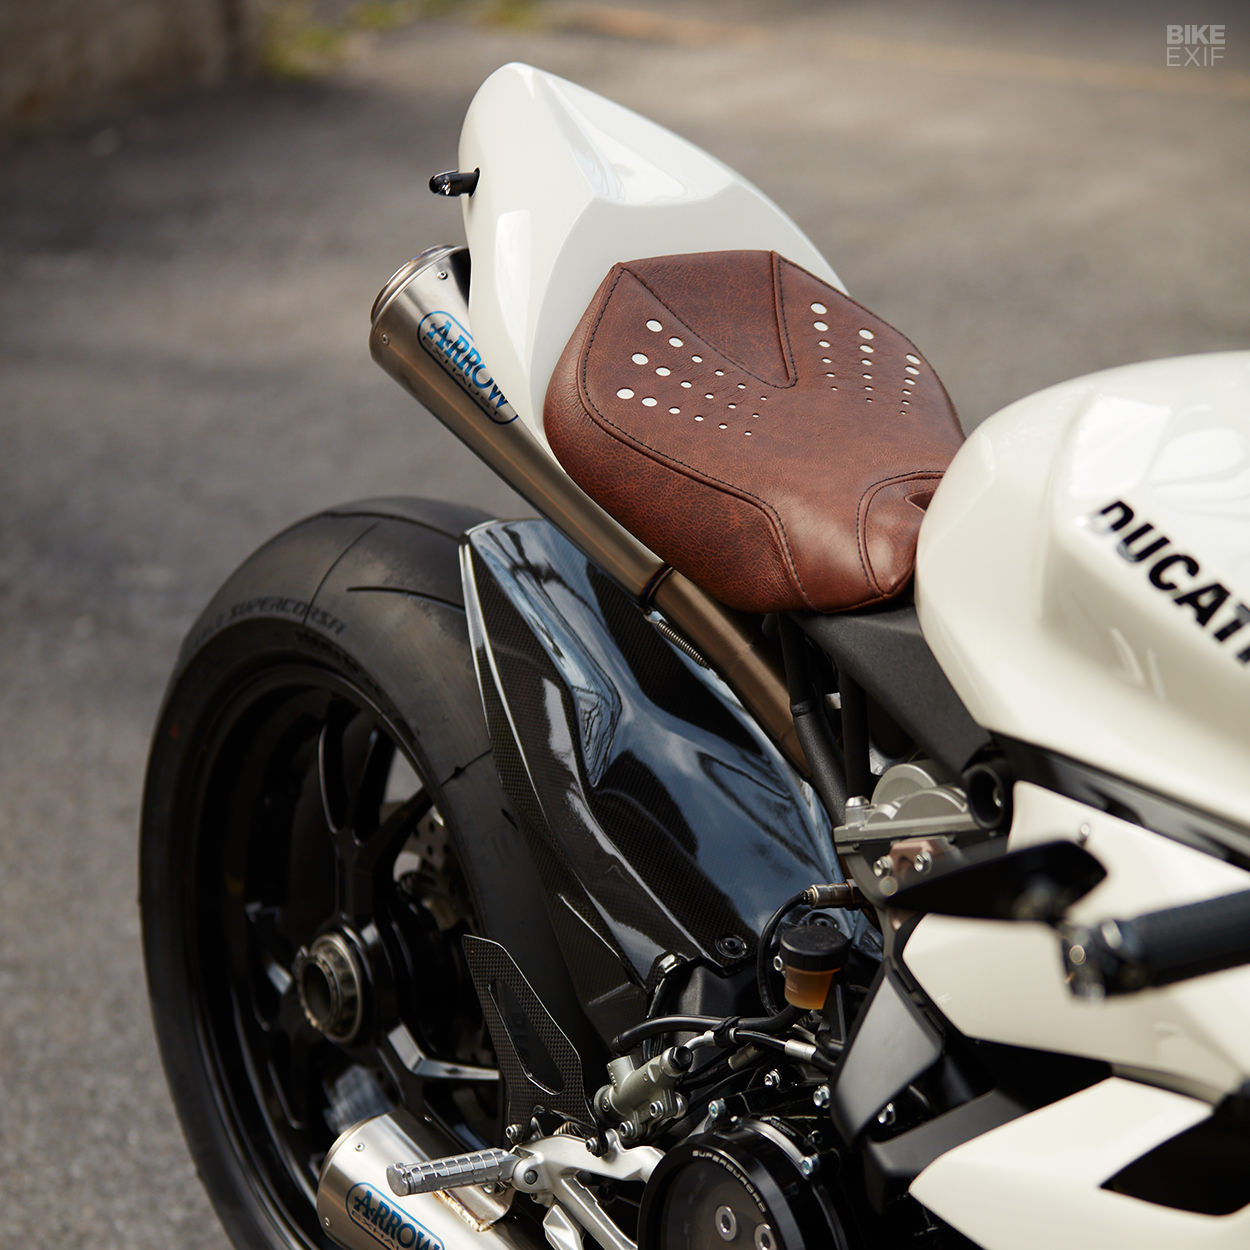 Custom Ducati 899 Panigale cafe racer by Mr Motorcycles